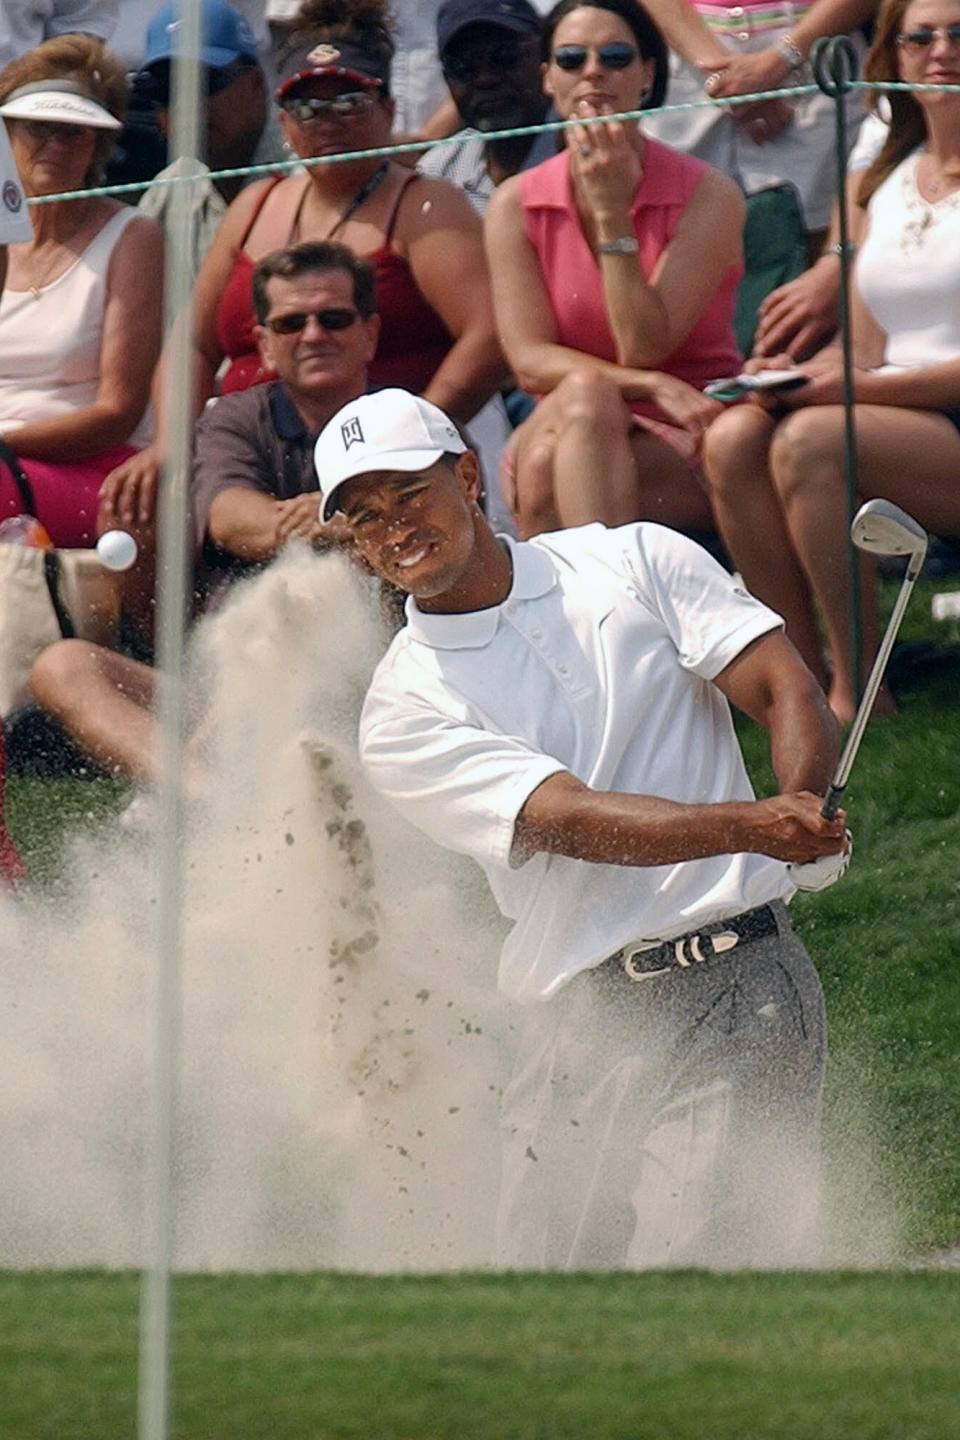 FILE - In this May 13, 2005, file photo, Tiger Woods hits out of a bunker to the 18th green during the second round of the Byron Nelson Championship in Irving, Texas. Woods made bogey to miss the cut, ending his record streak of 142 consecutive cuts made. (AP Photo/Tony Gutierrez, File)